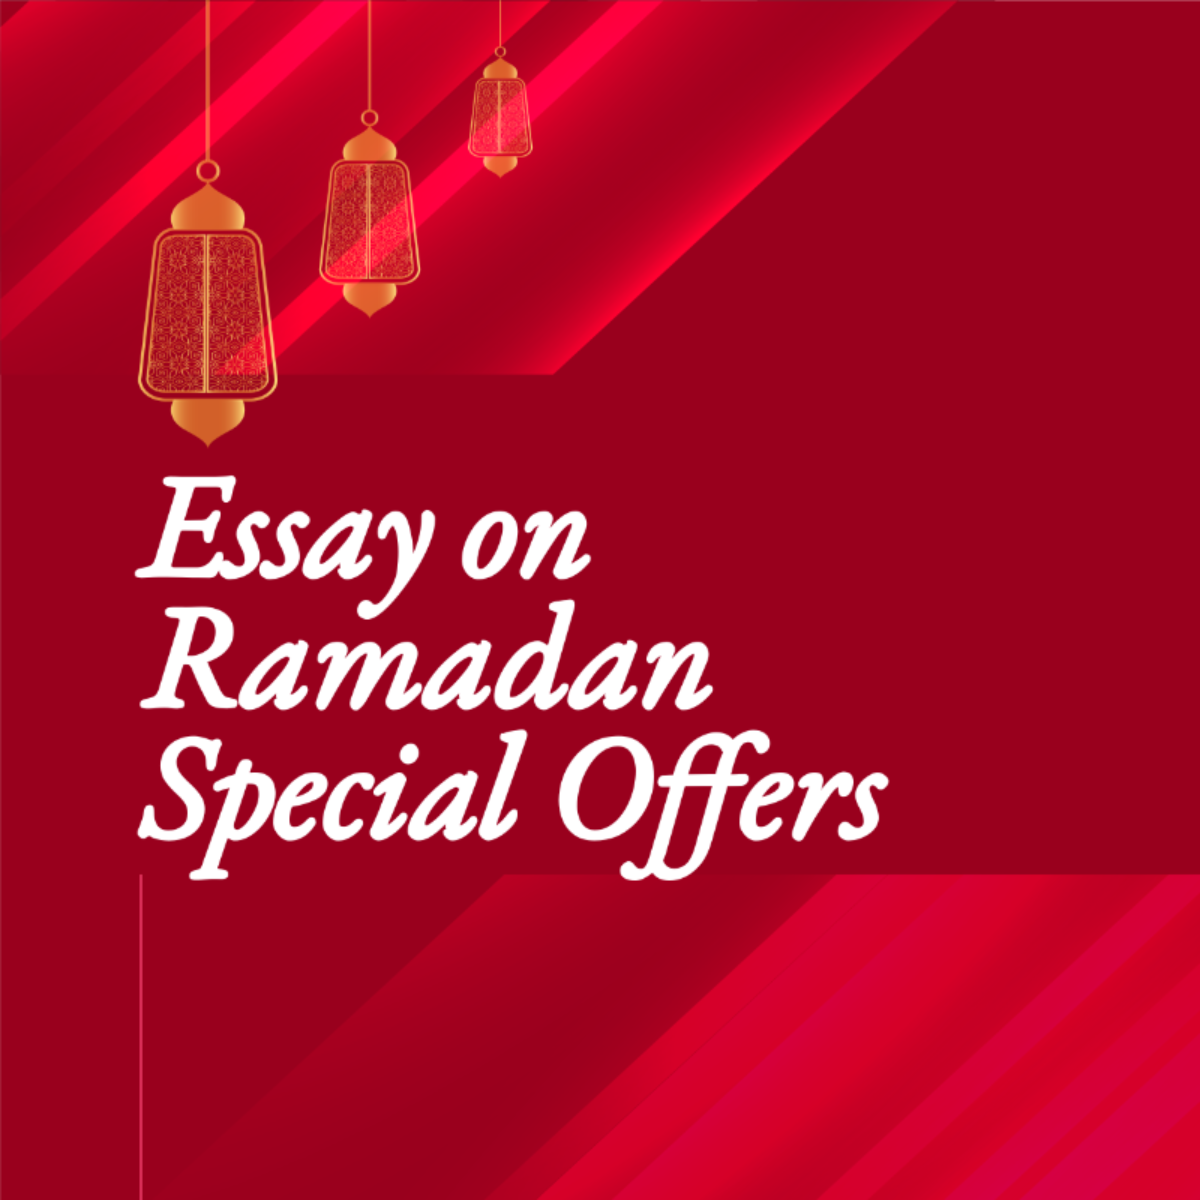 Free Ramadan Discounts and Promotions Essay Template